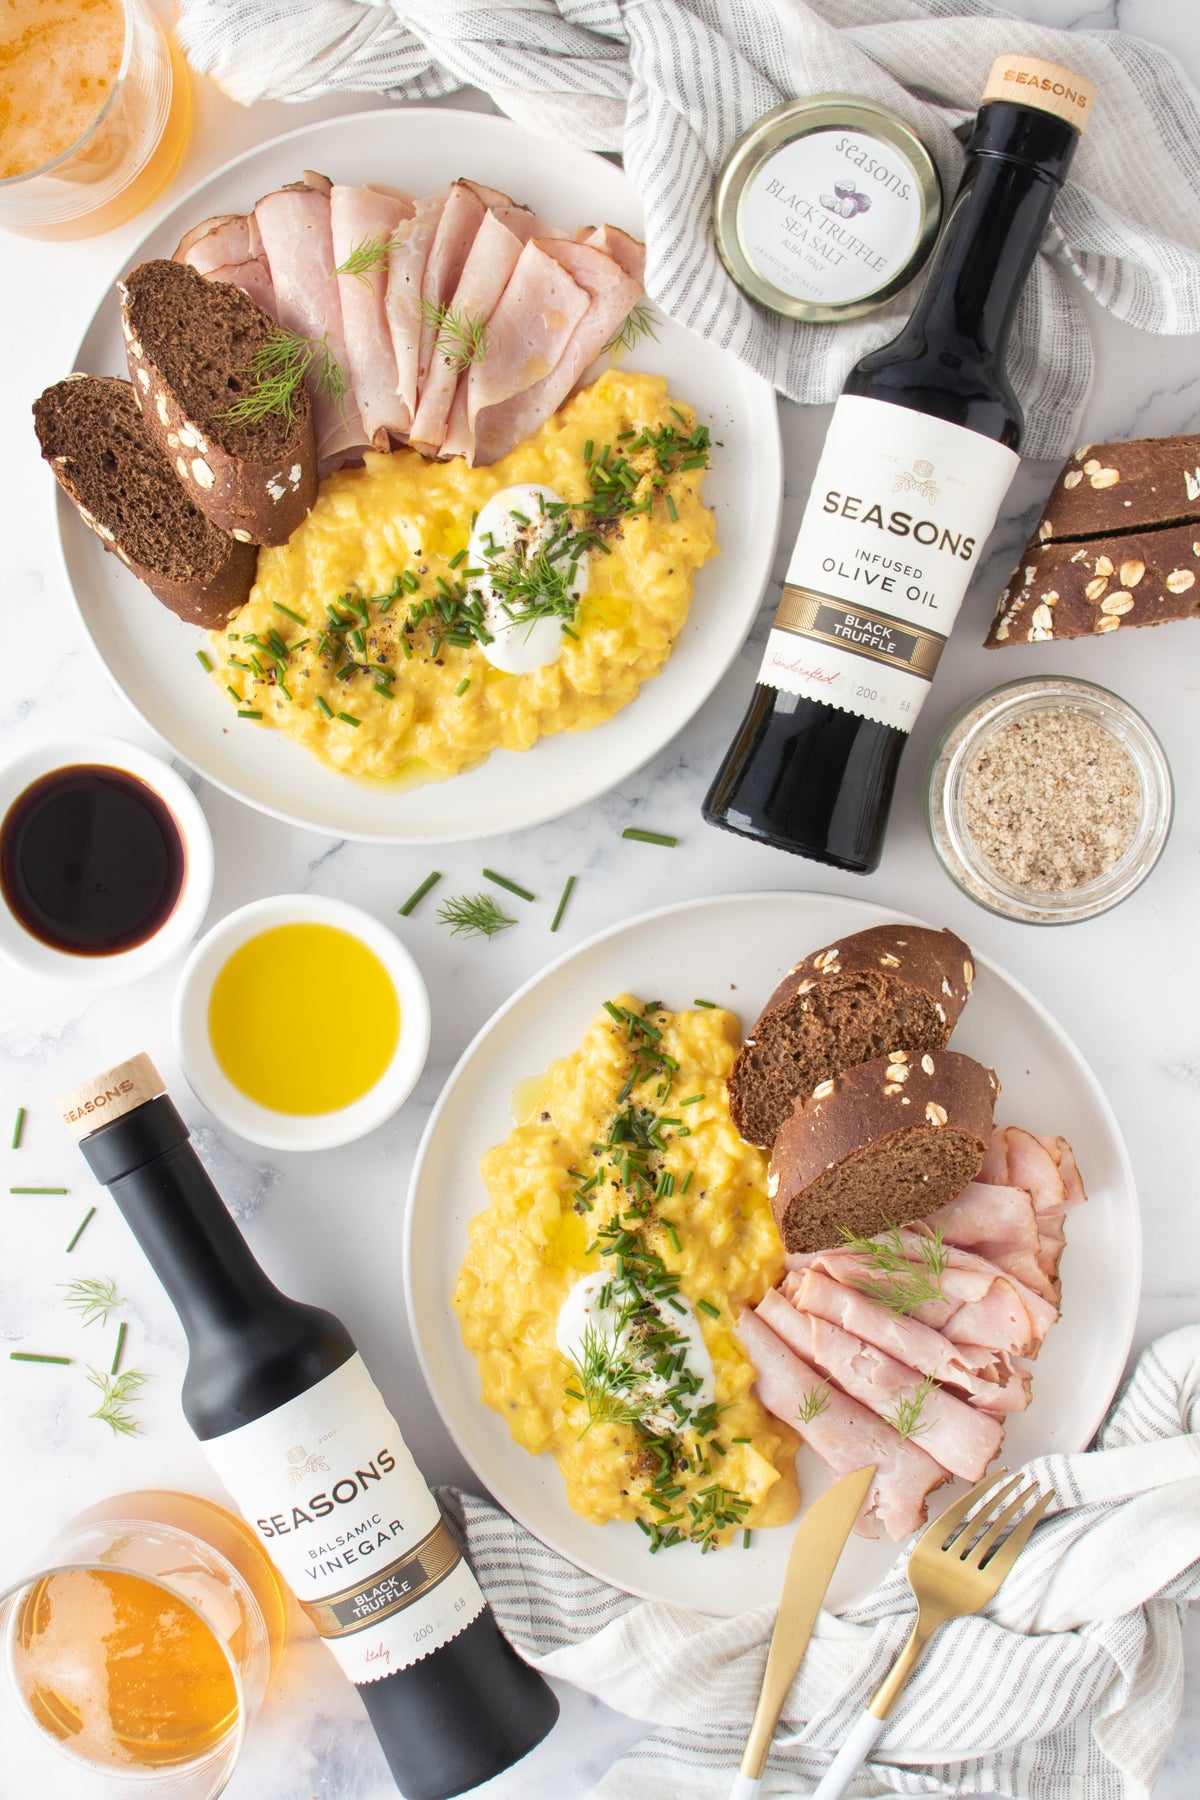 Truffle Soft Scramble with Jambon and Brown Bread